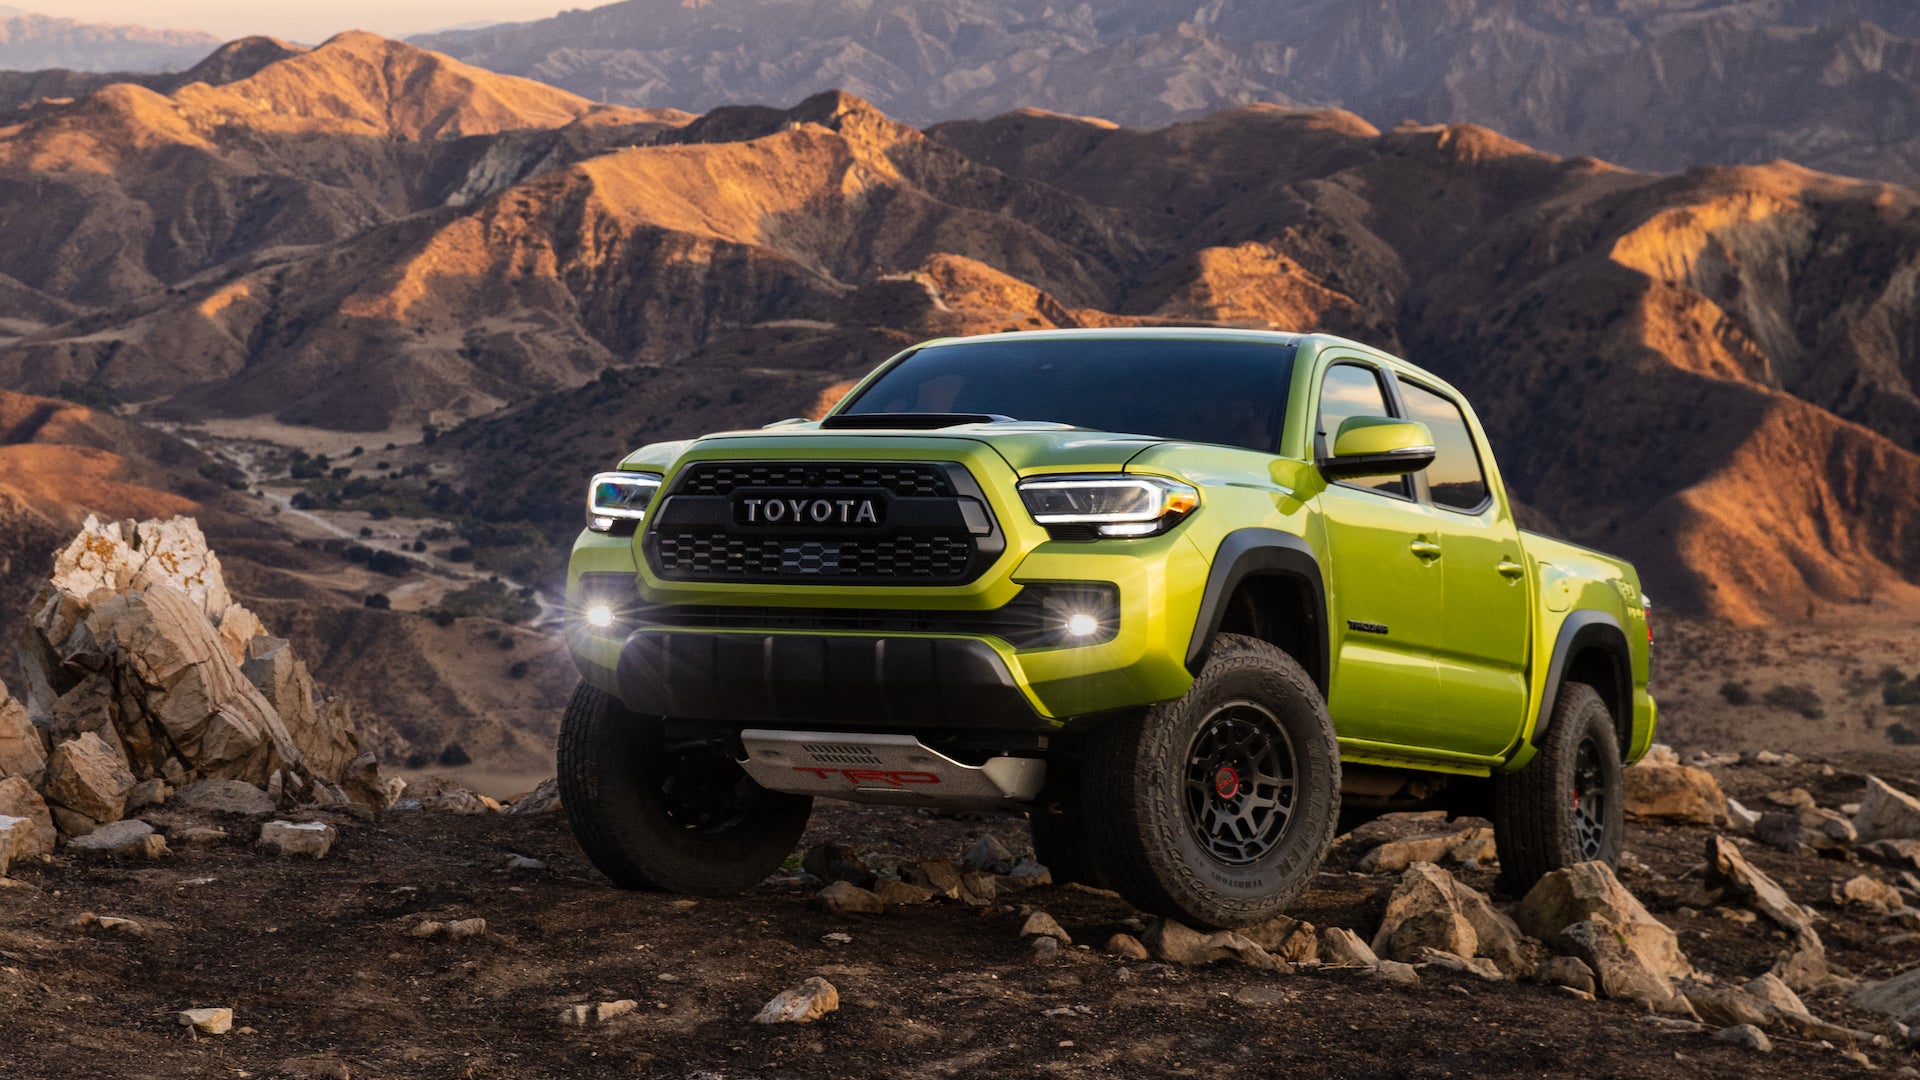 2022 Toyota Tacoma TRD Pro and Trail Edition: More Lift, More Colors, and Even Better Off-Road Specs